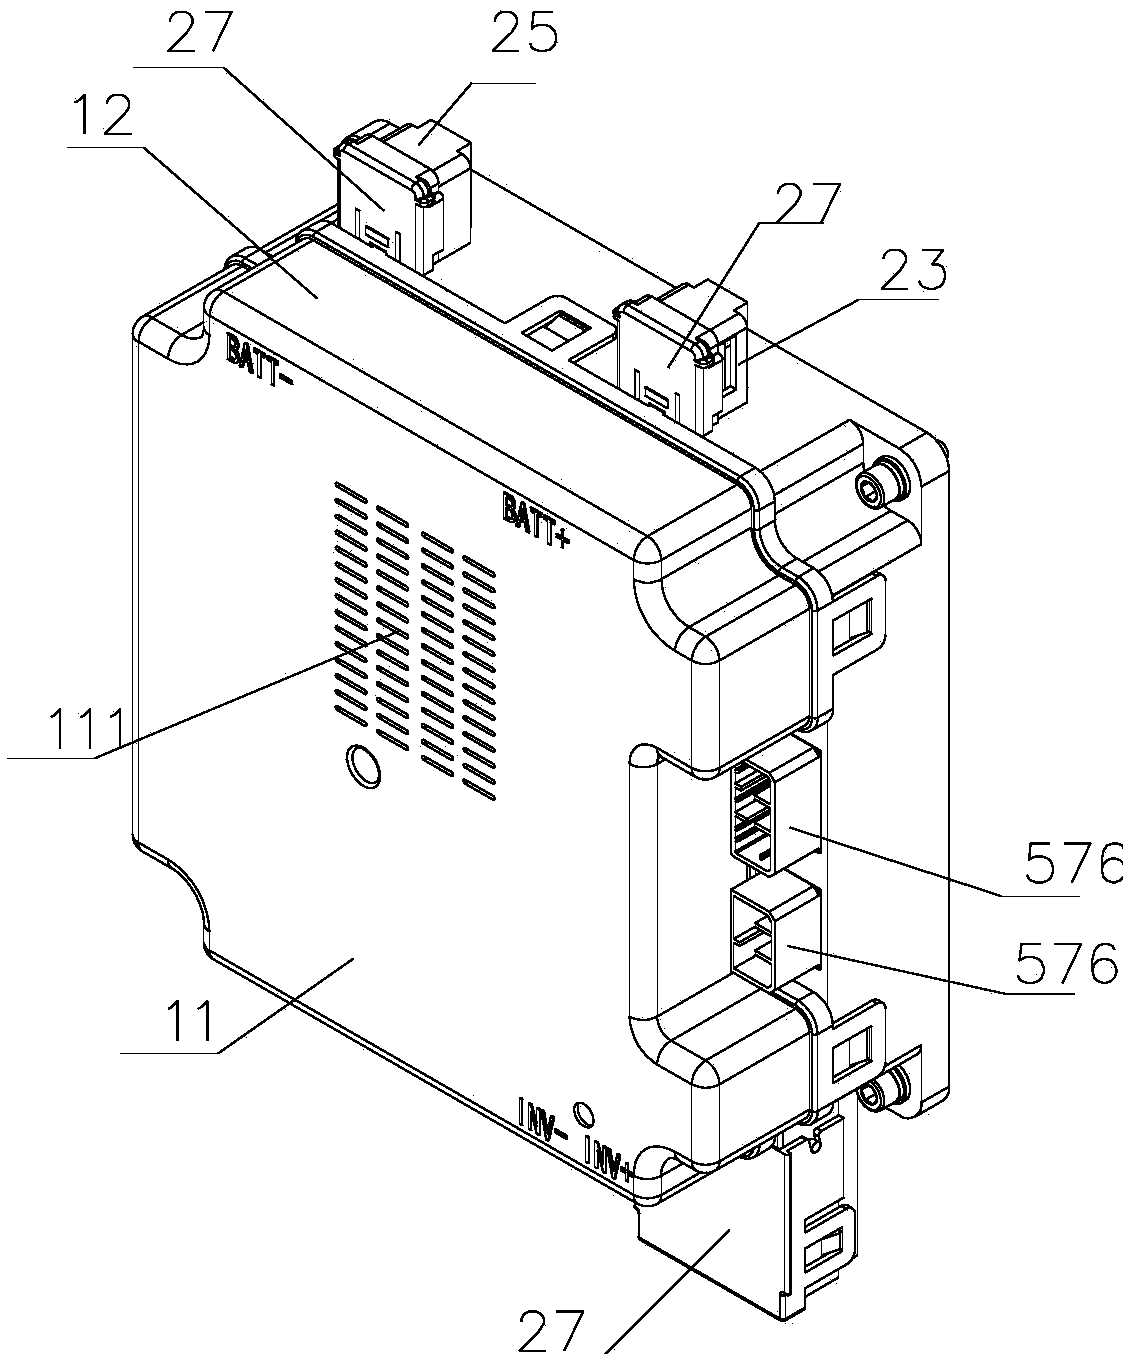 An integrated battery system high-voltage electrical box